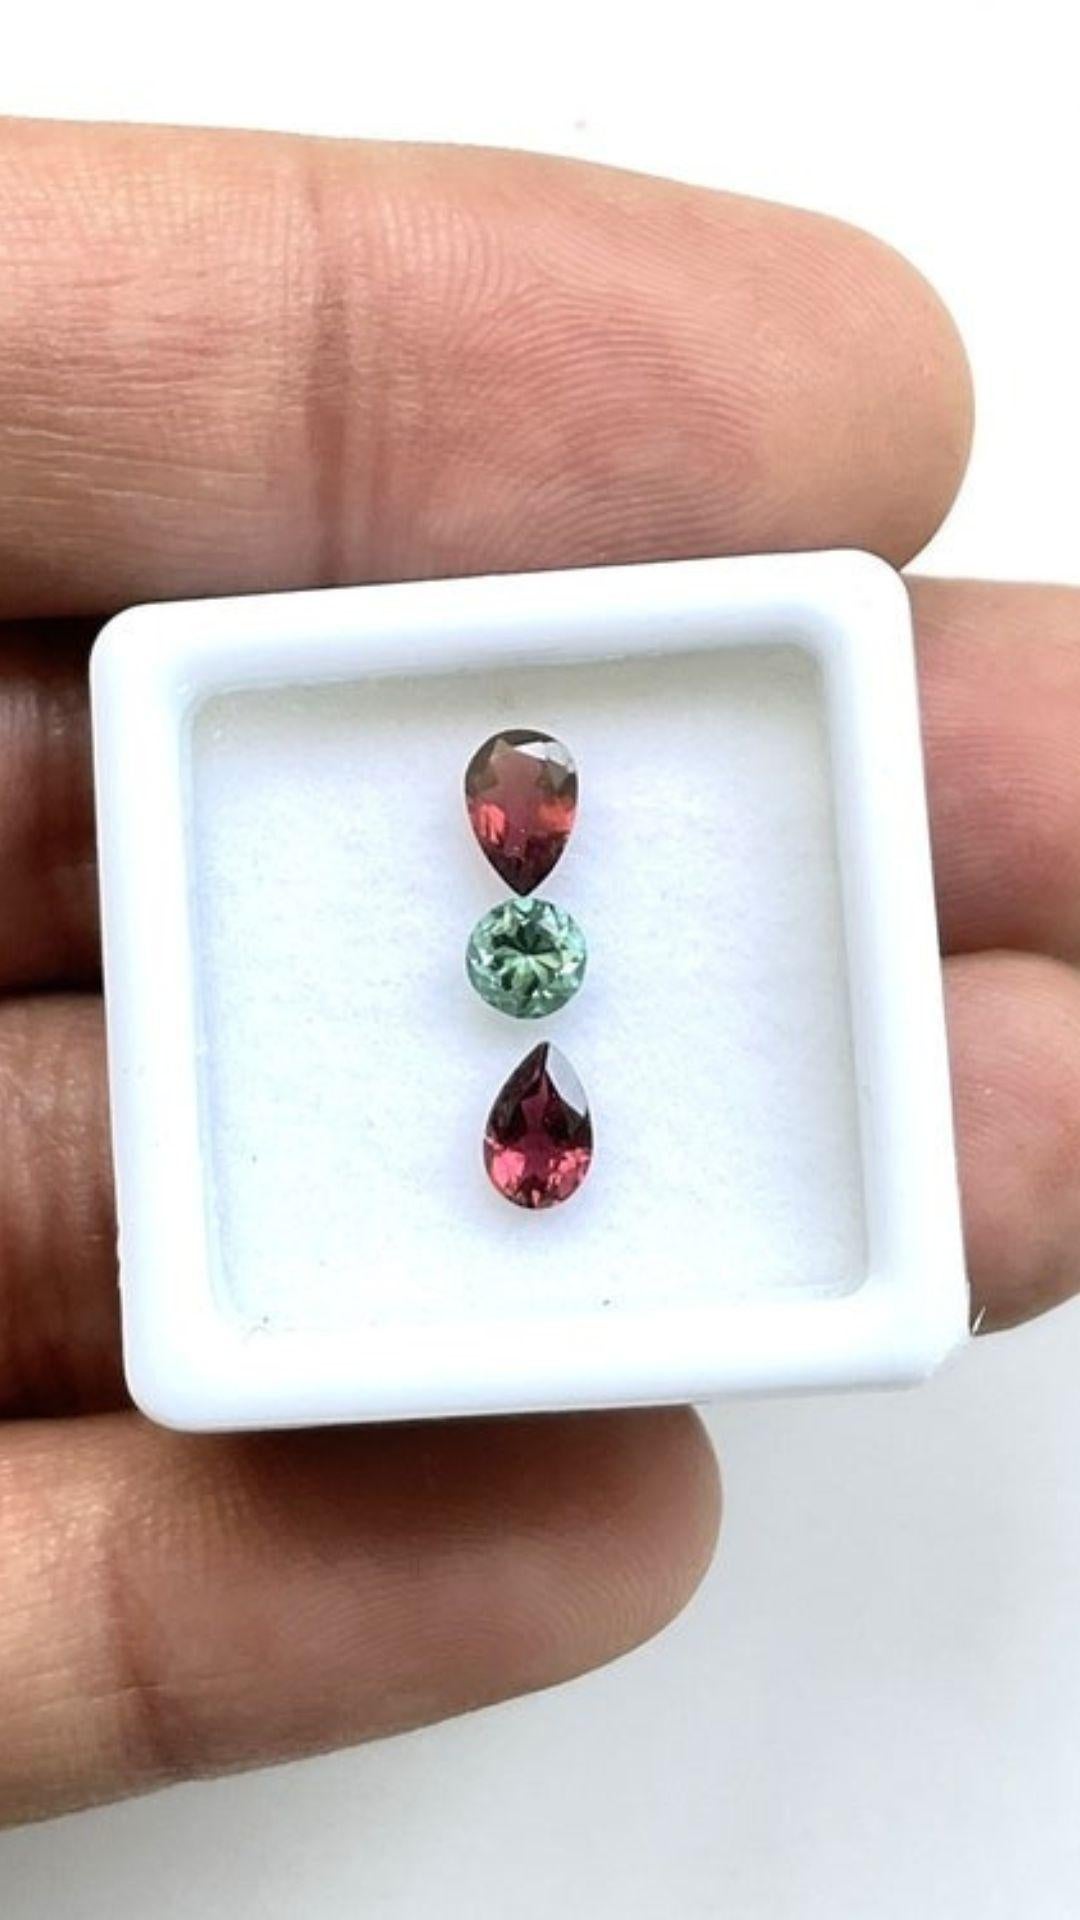 Gemstone - Tourmaline
Weight- 1.20 Carats
Shape - Round / Pear
Size - 4 to 6x4 mm
Pieces - 3